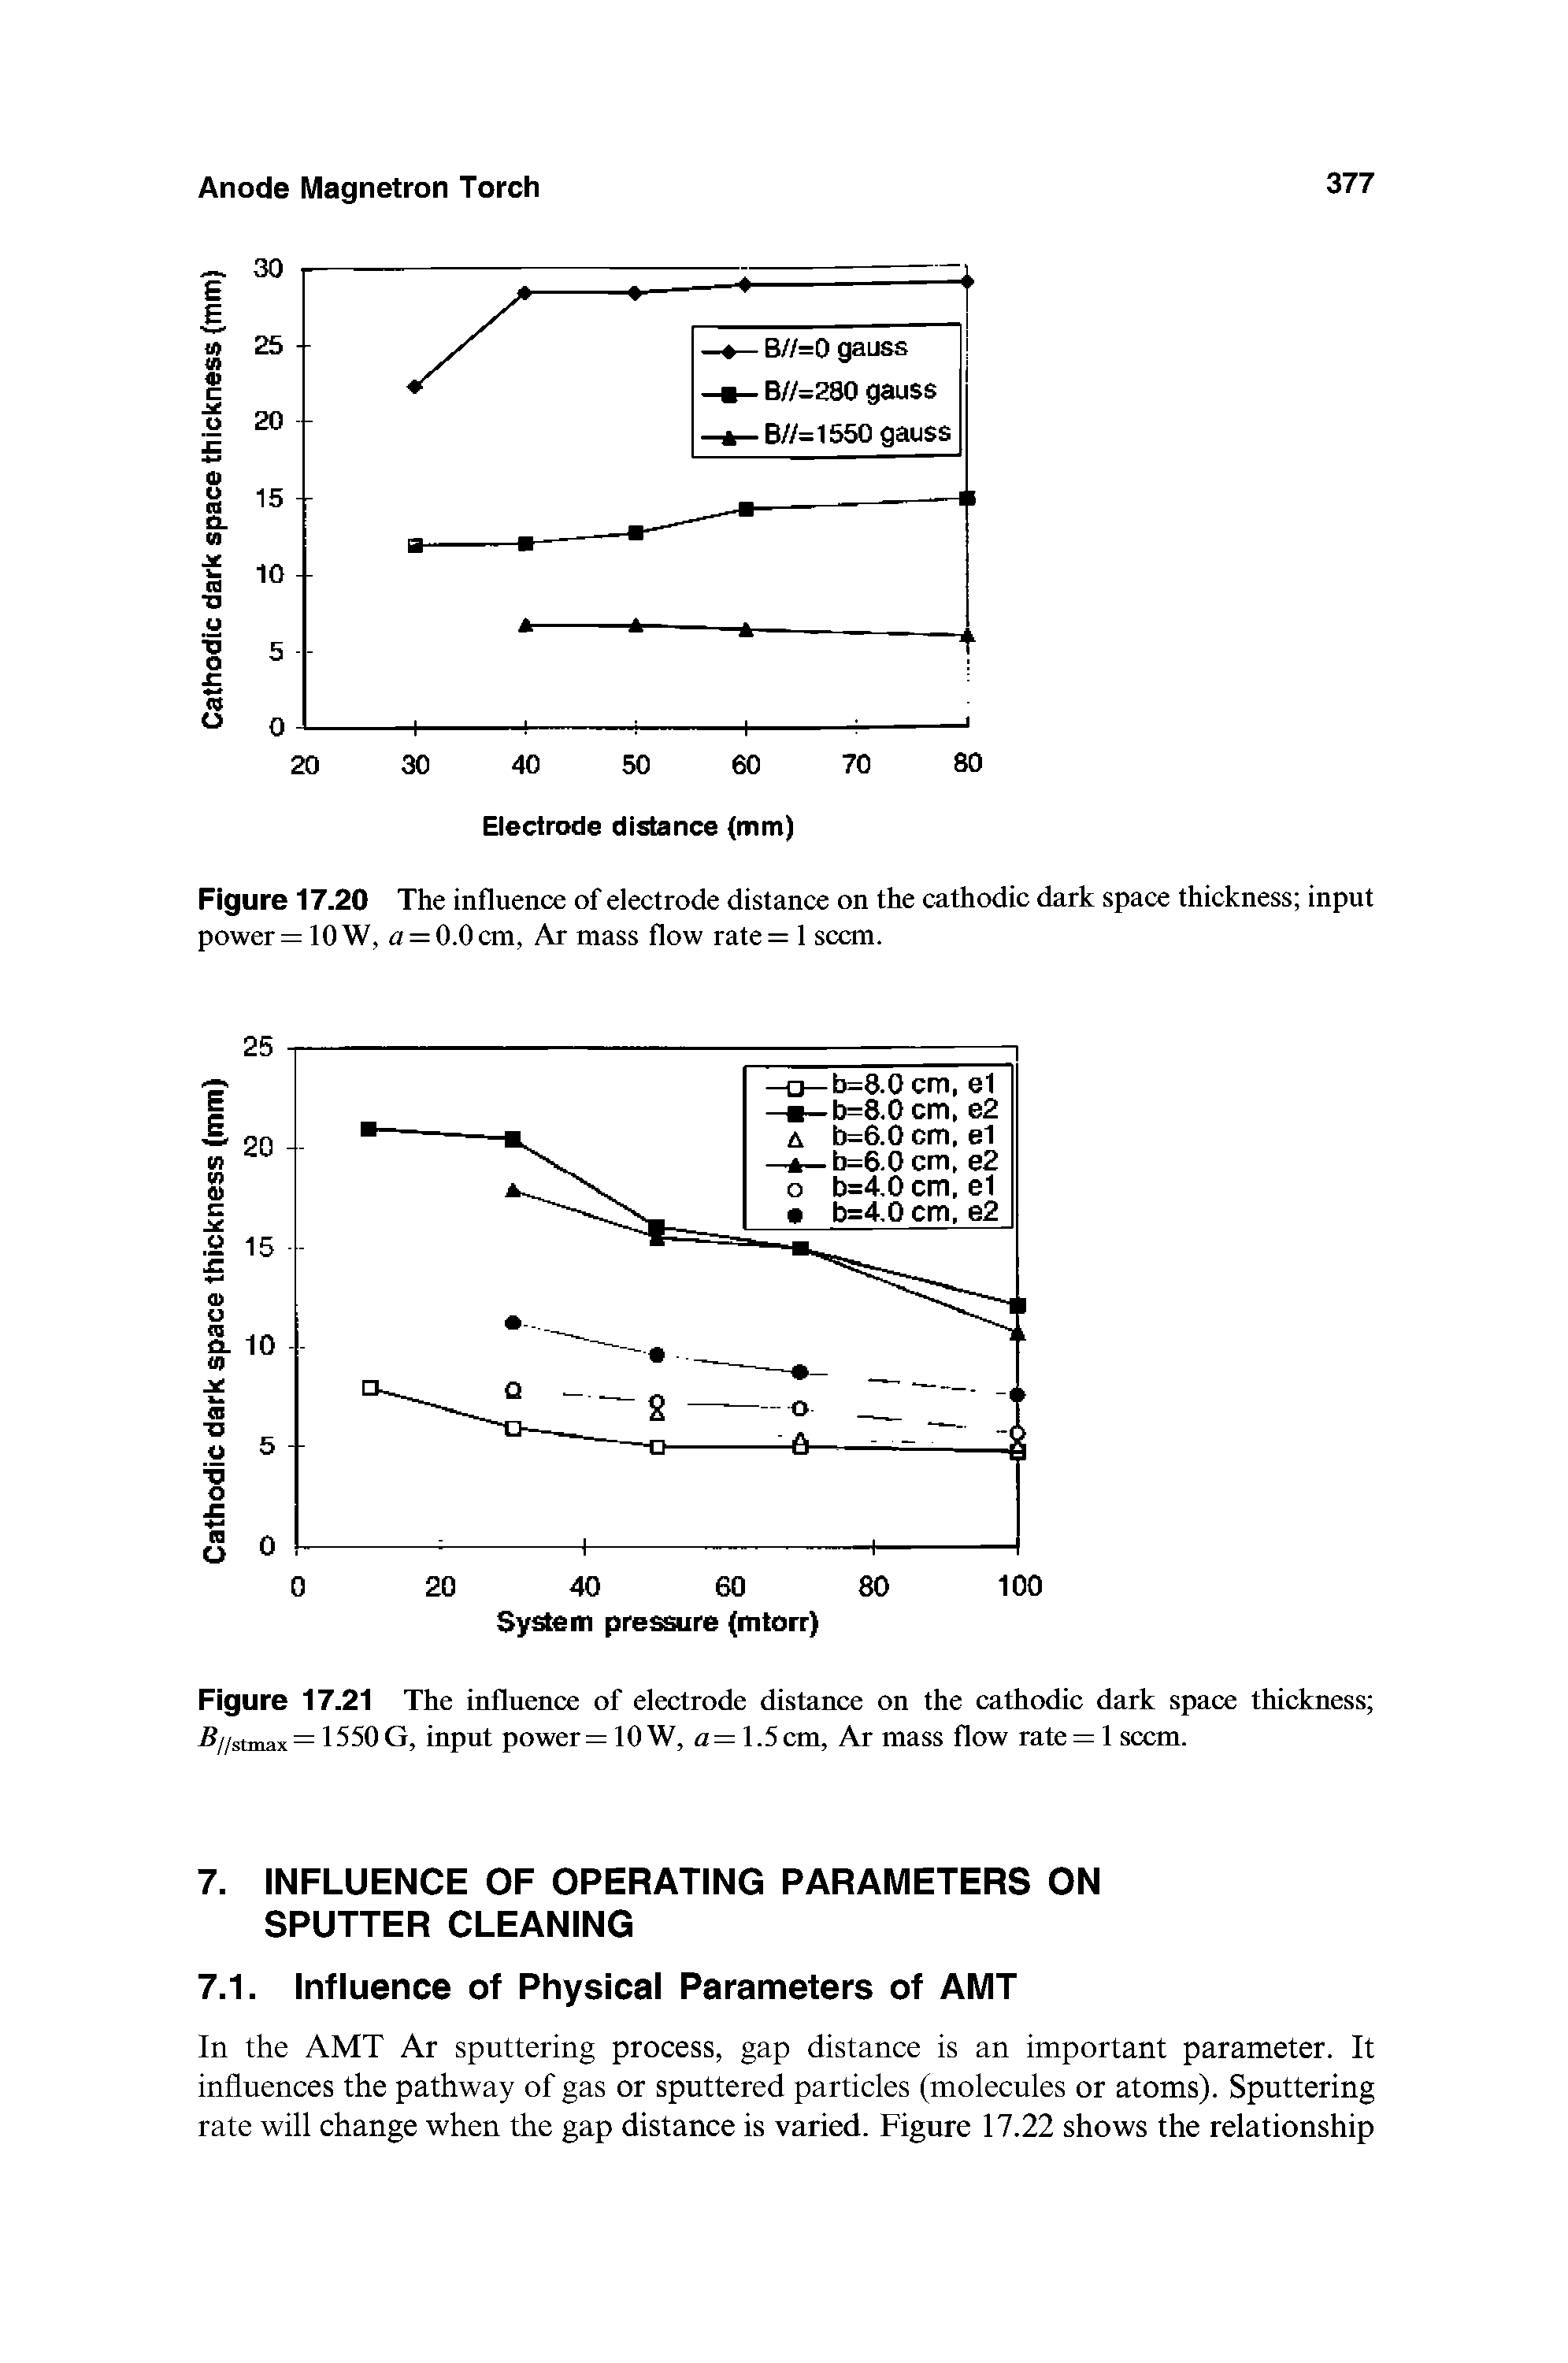 Figure 17.20 The influence of electrode distance on the cathodic dark space thickness input power = low, a = 0.0cm, Ar mass flow rate= 1 seem.